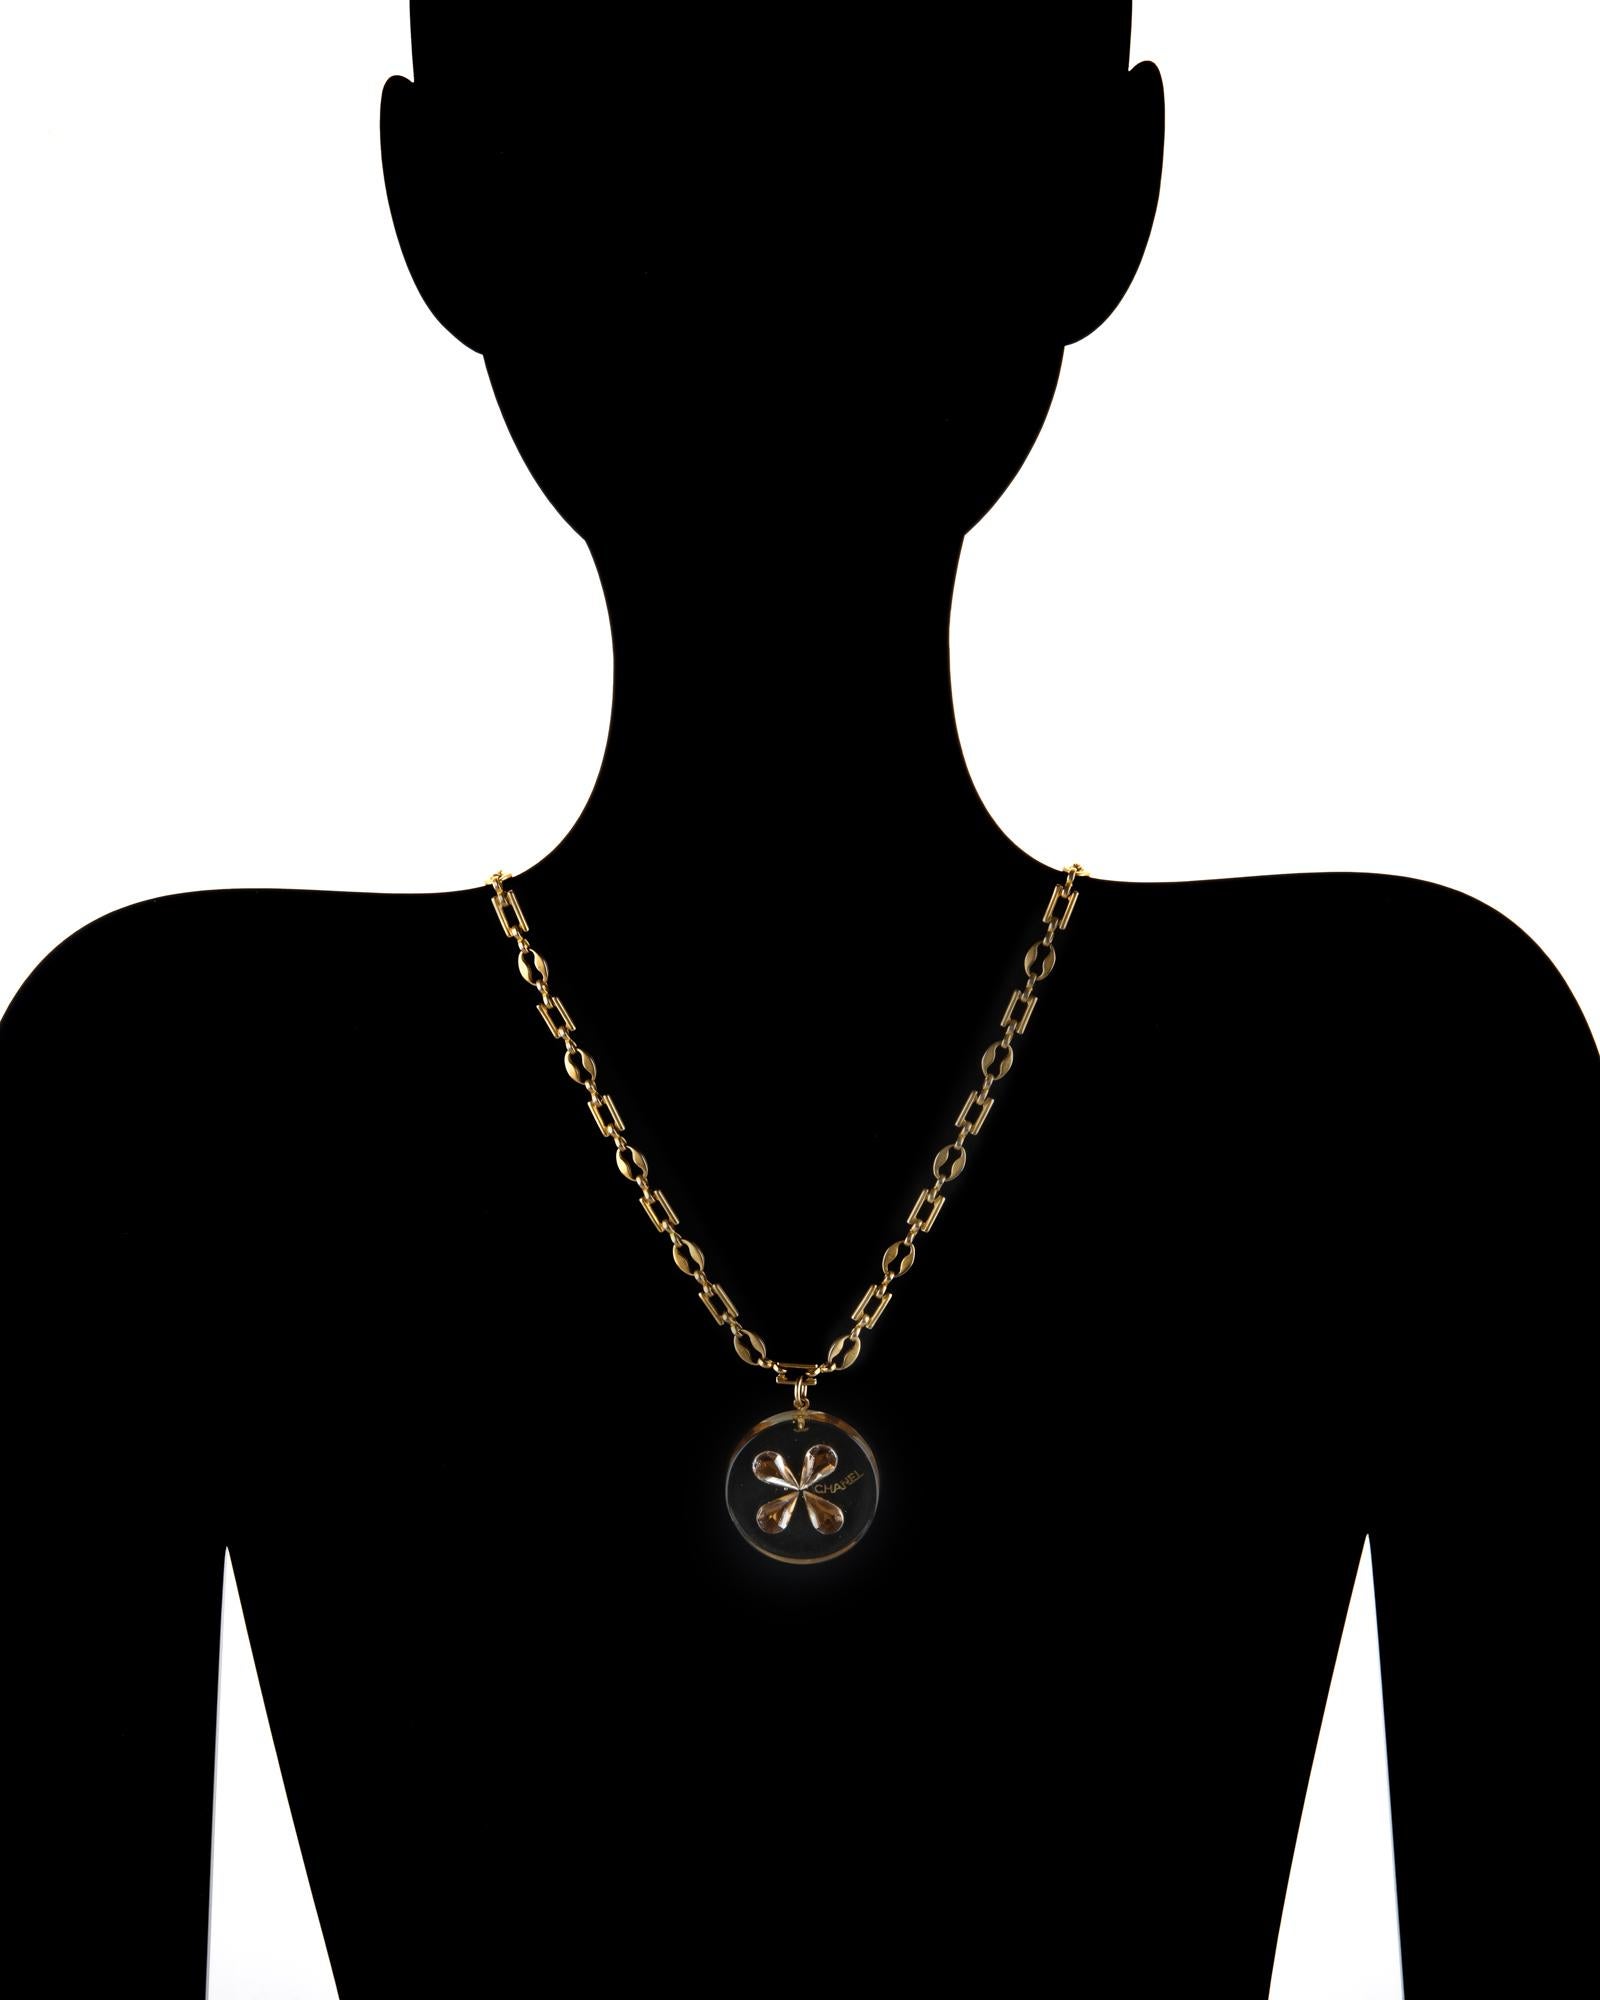 Stylish Chanel pendant necklace crafted in yellow gold tone, circa 2001 

The resin pendant measures 36.5mm (1.43 inches) and is inset with a cognac hued four leaf clover faux jewel design. The chain features an alternating pattern of mariner and